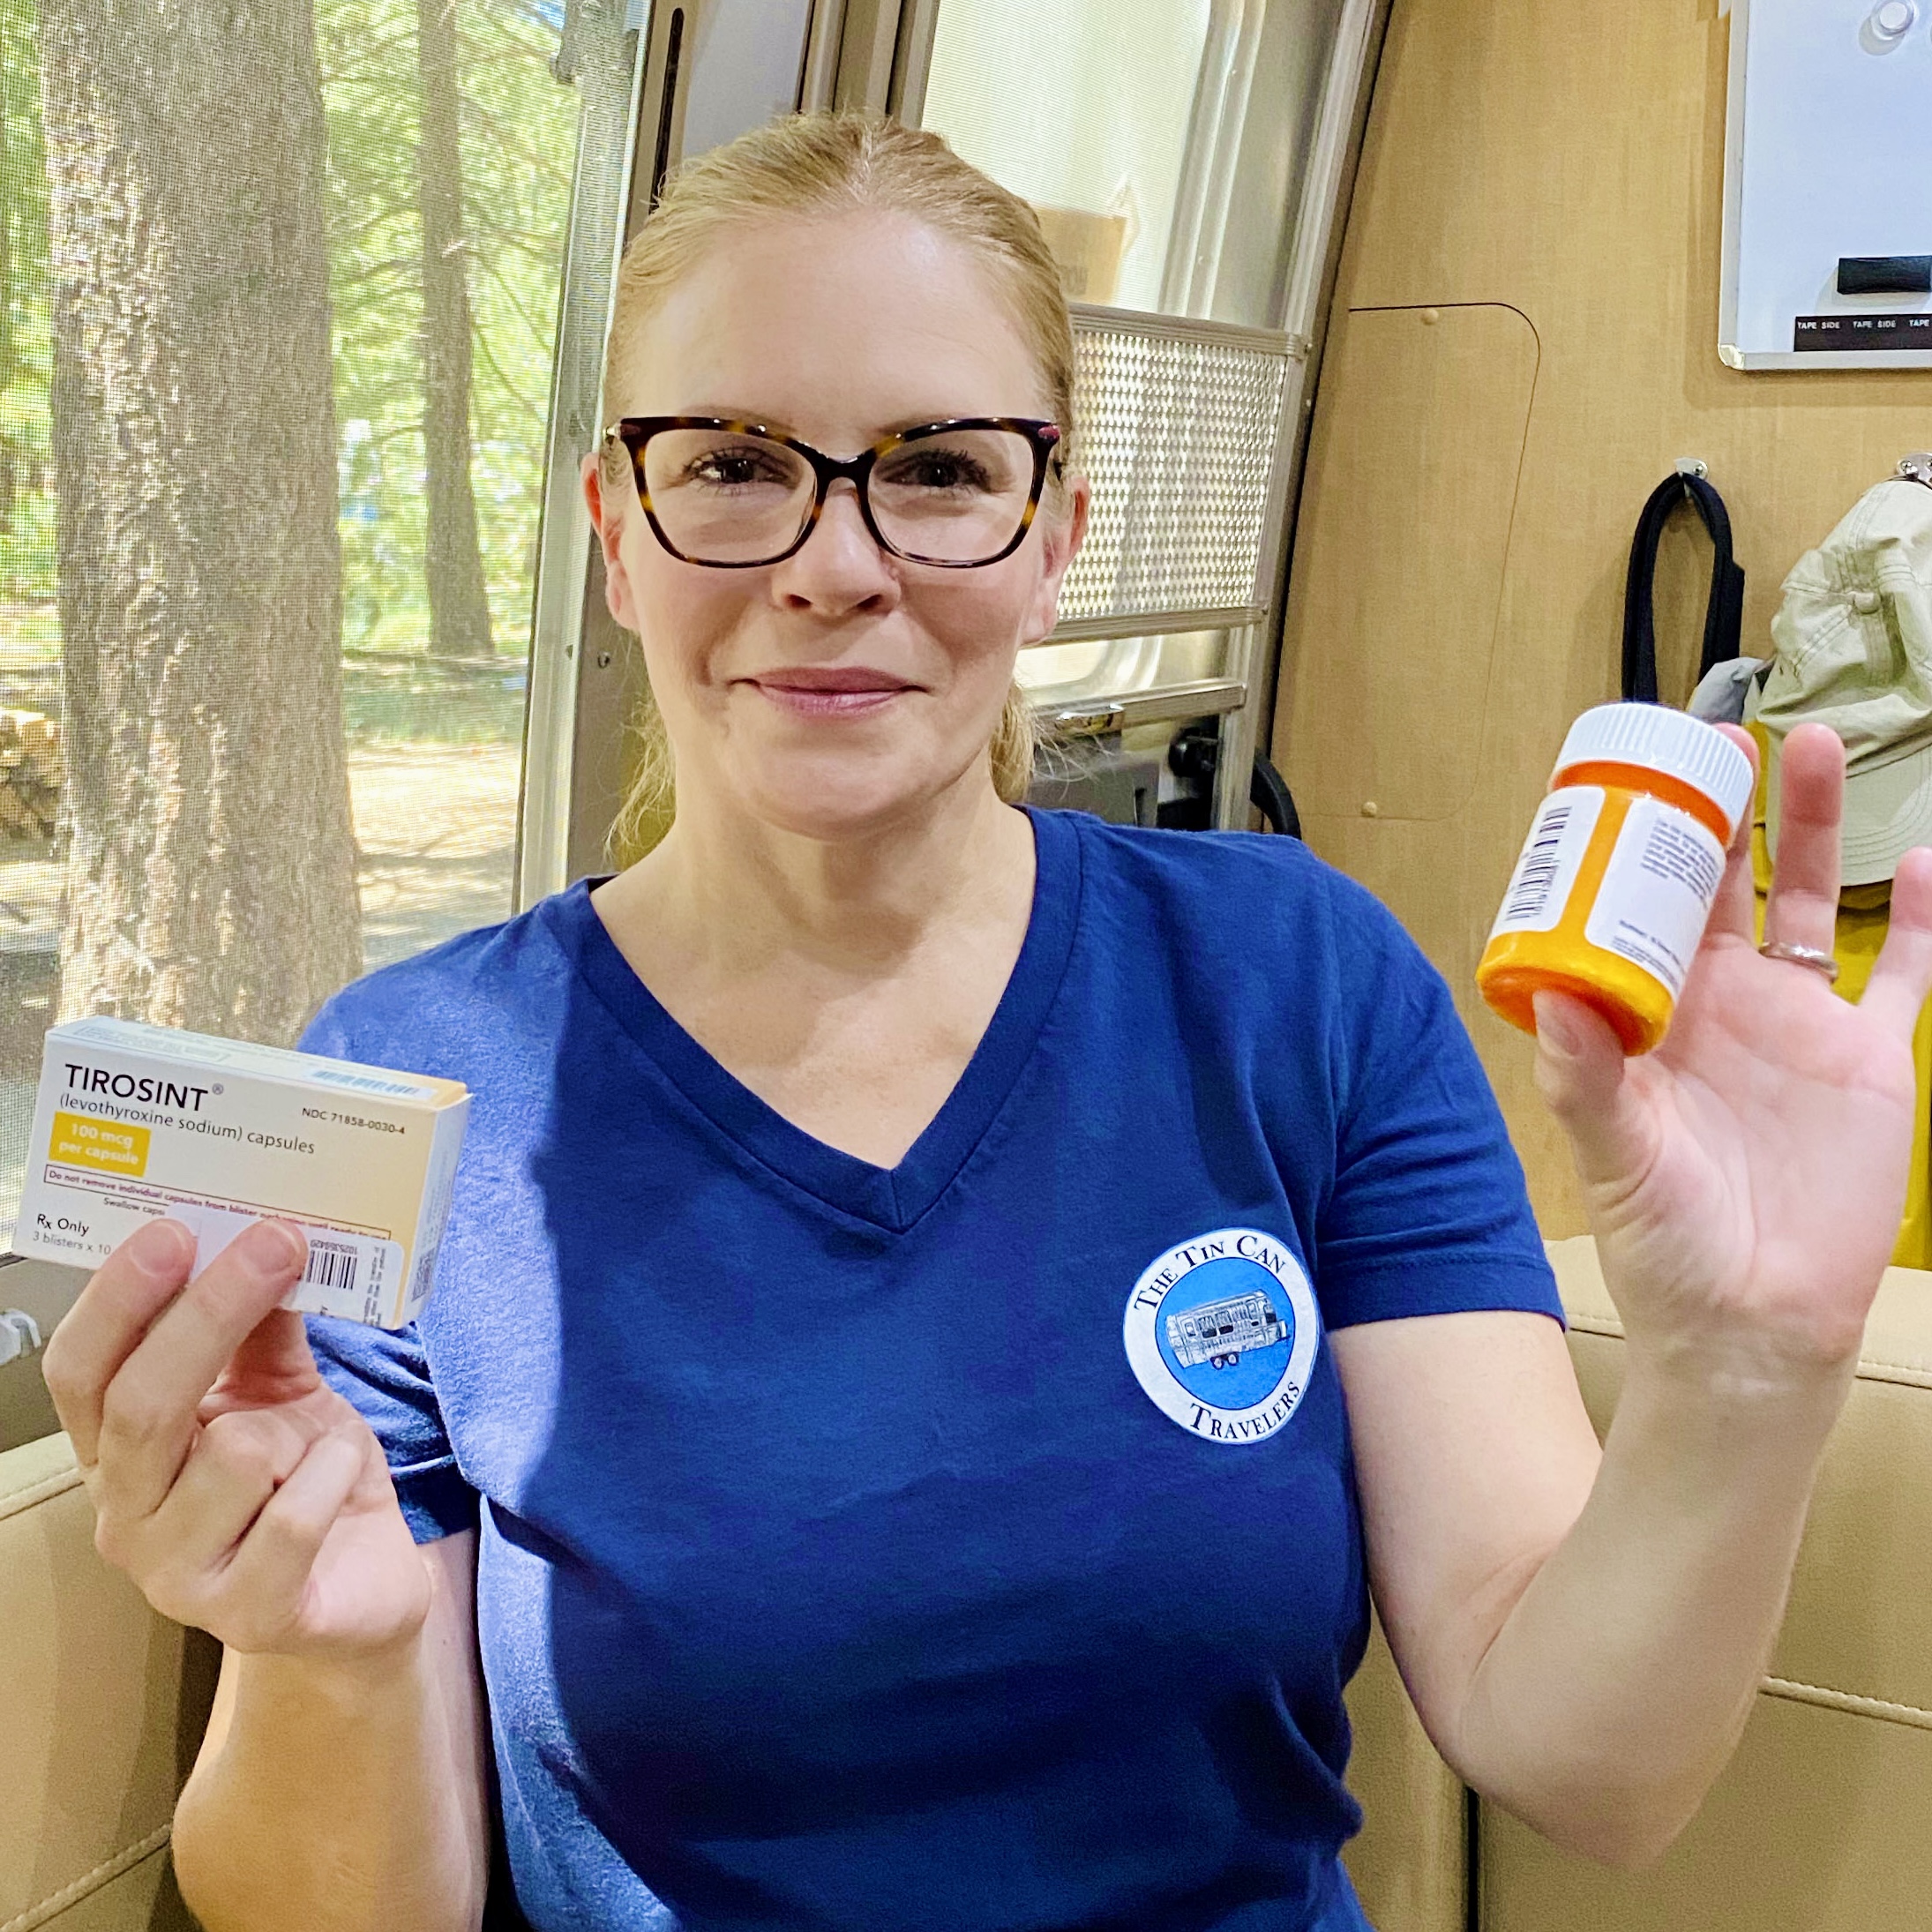 Rebecca holding her prescription medication she received in the mail while full-time RVing